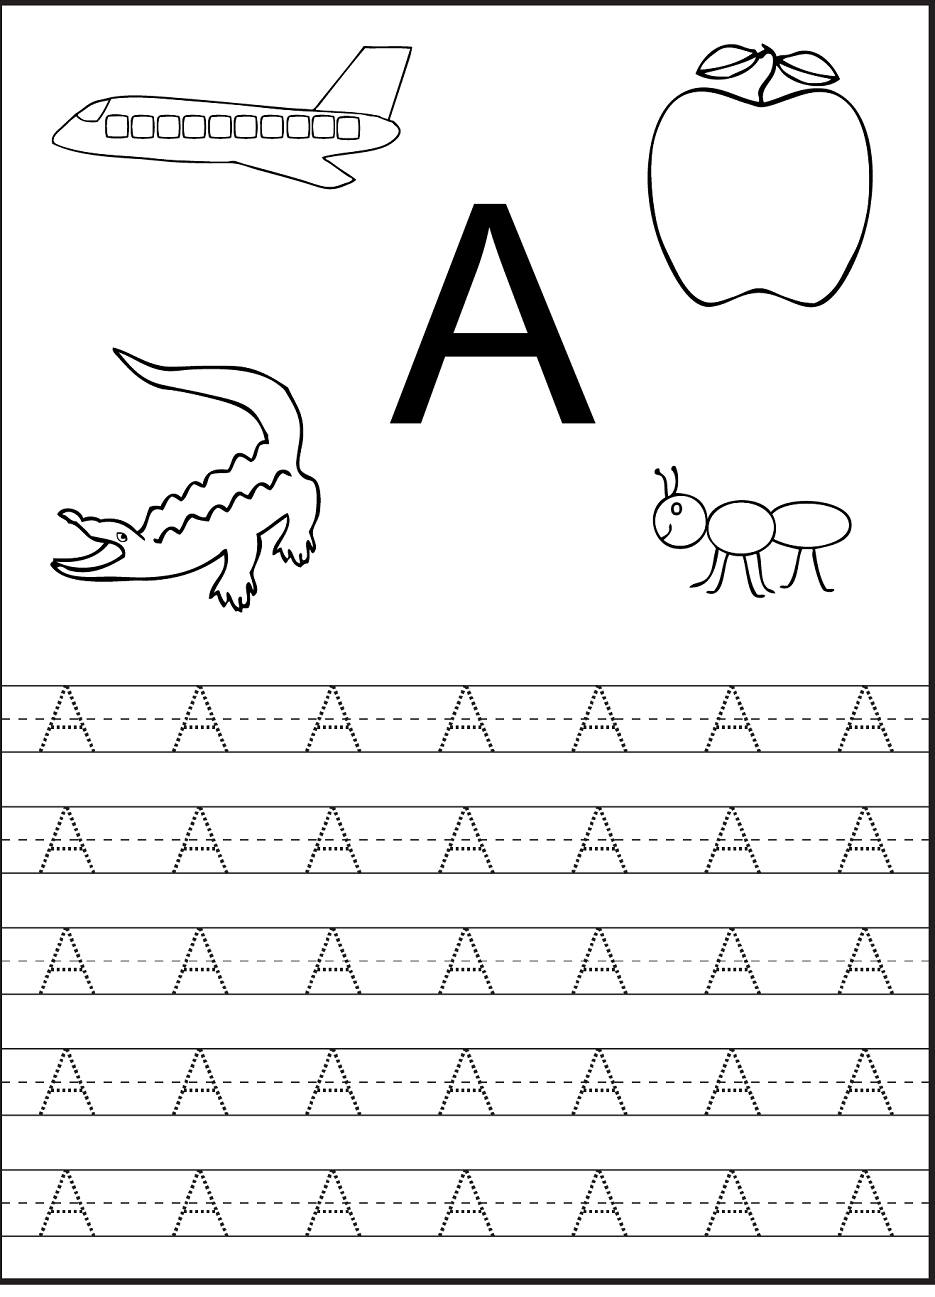 Tracing The Letter A Free Printable | Preschool Worksheets regarding Printable Tracing Letters For Toddlers